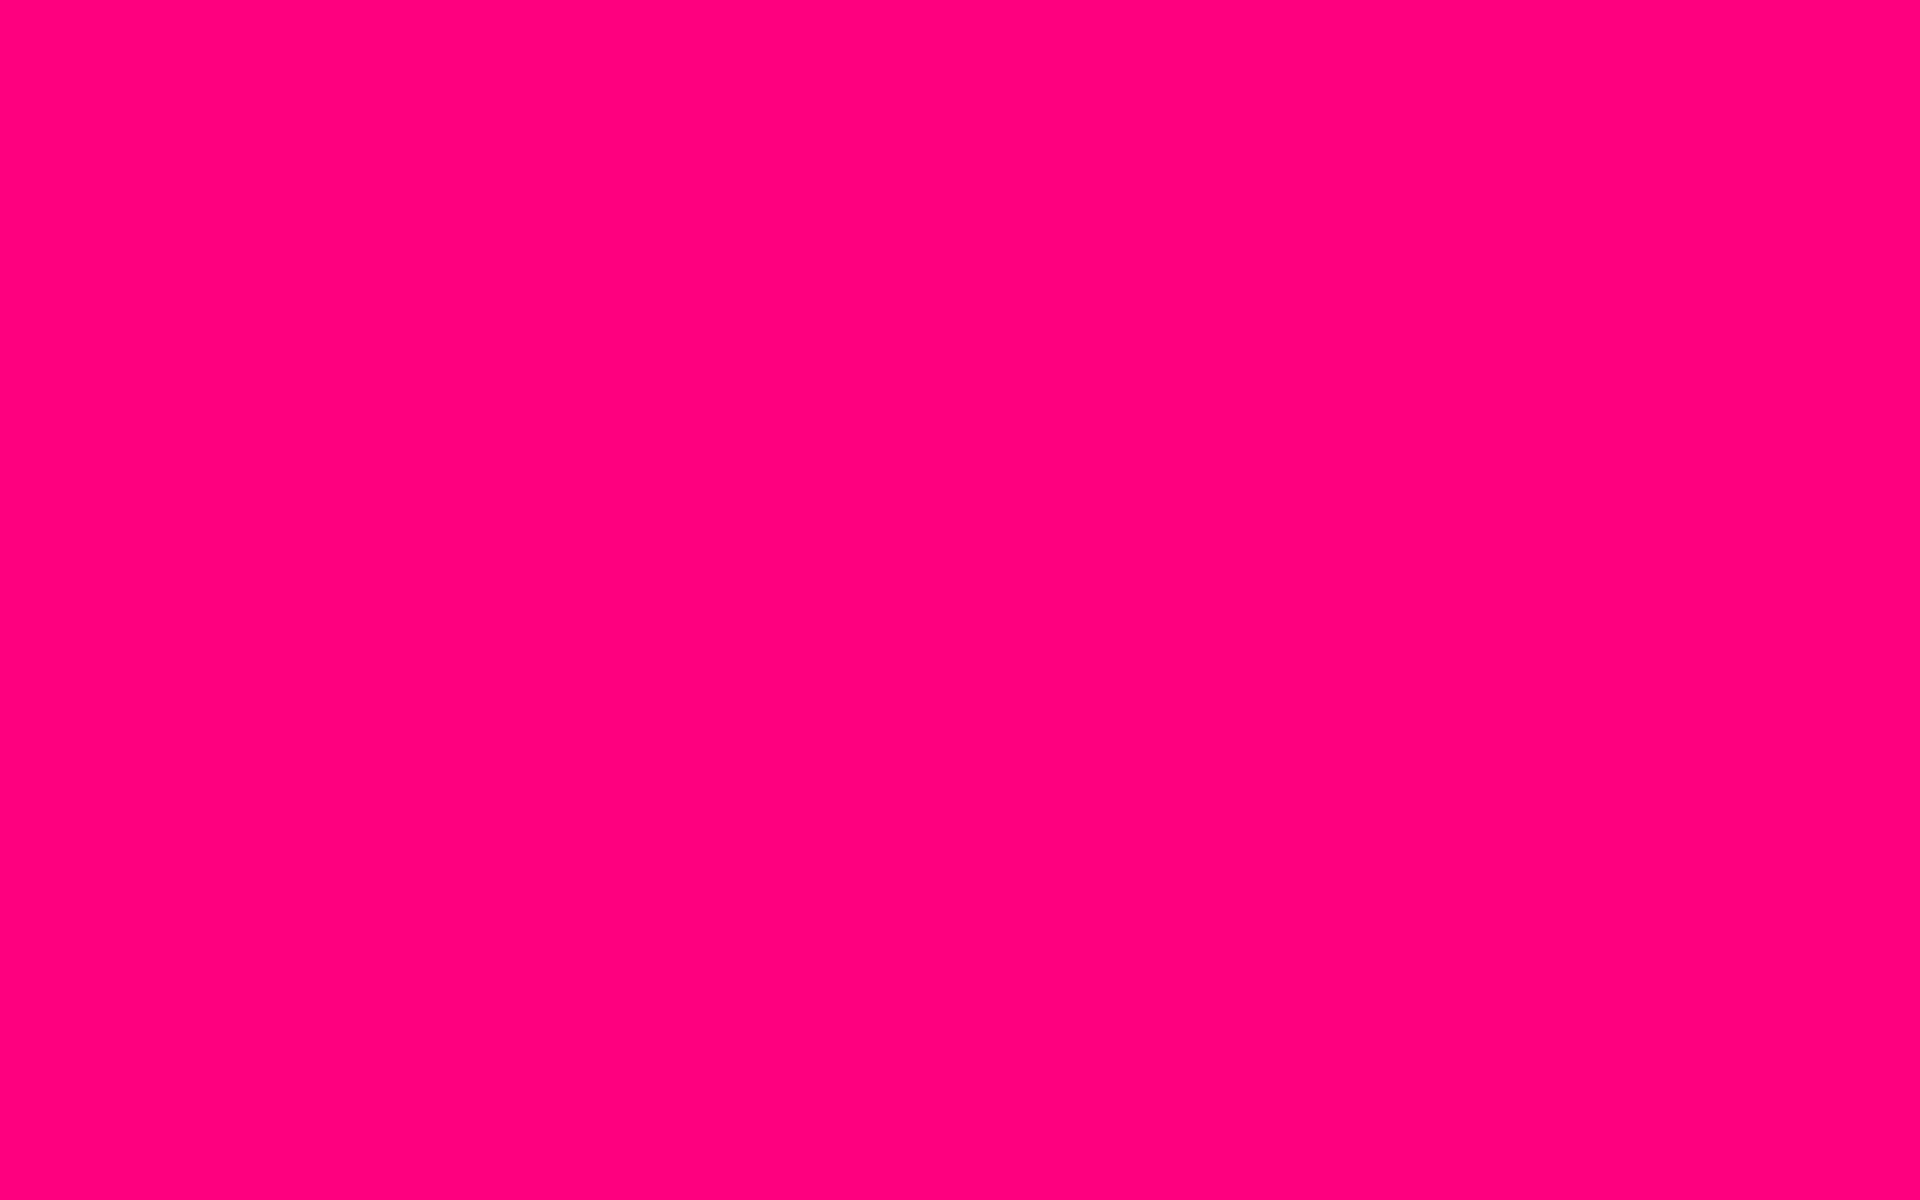 1920x1200 bright pink solid color background